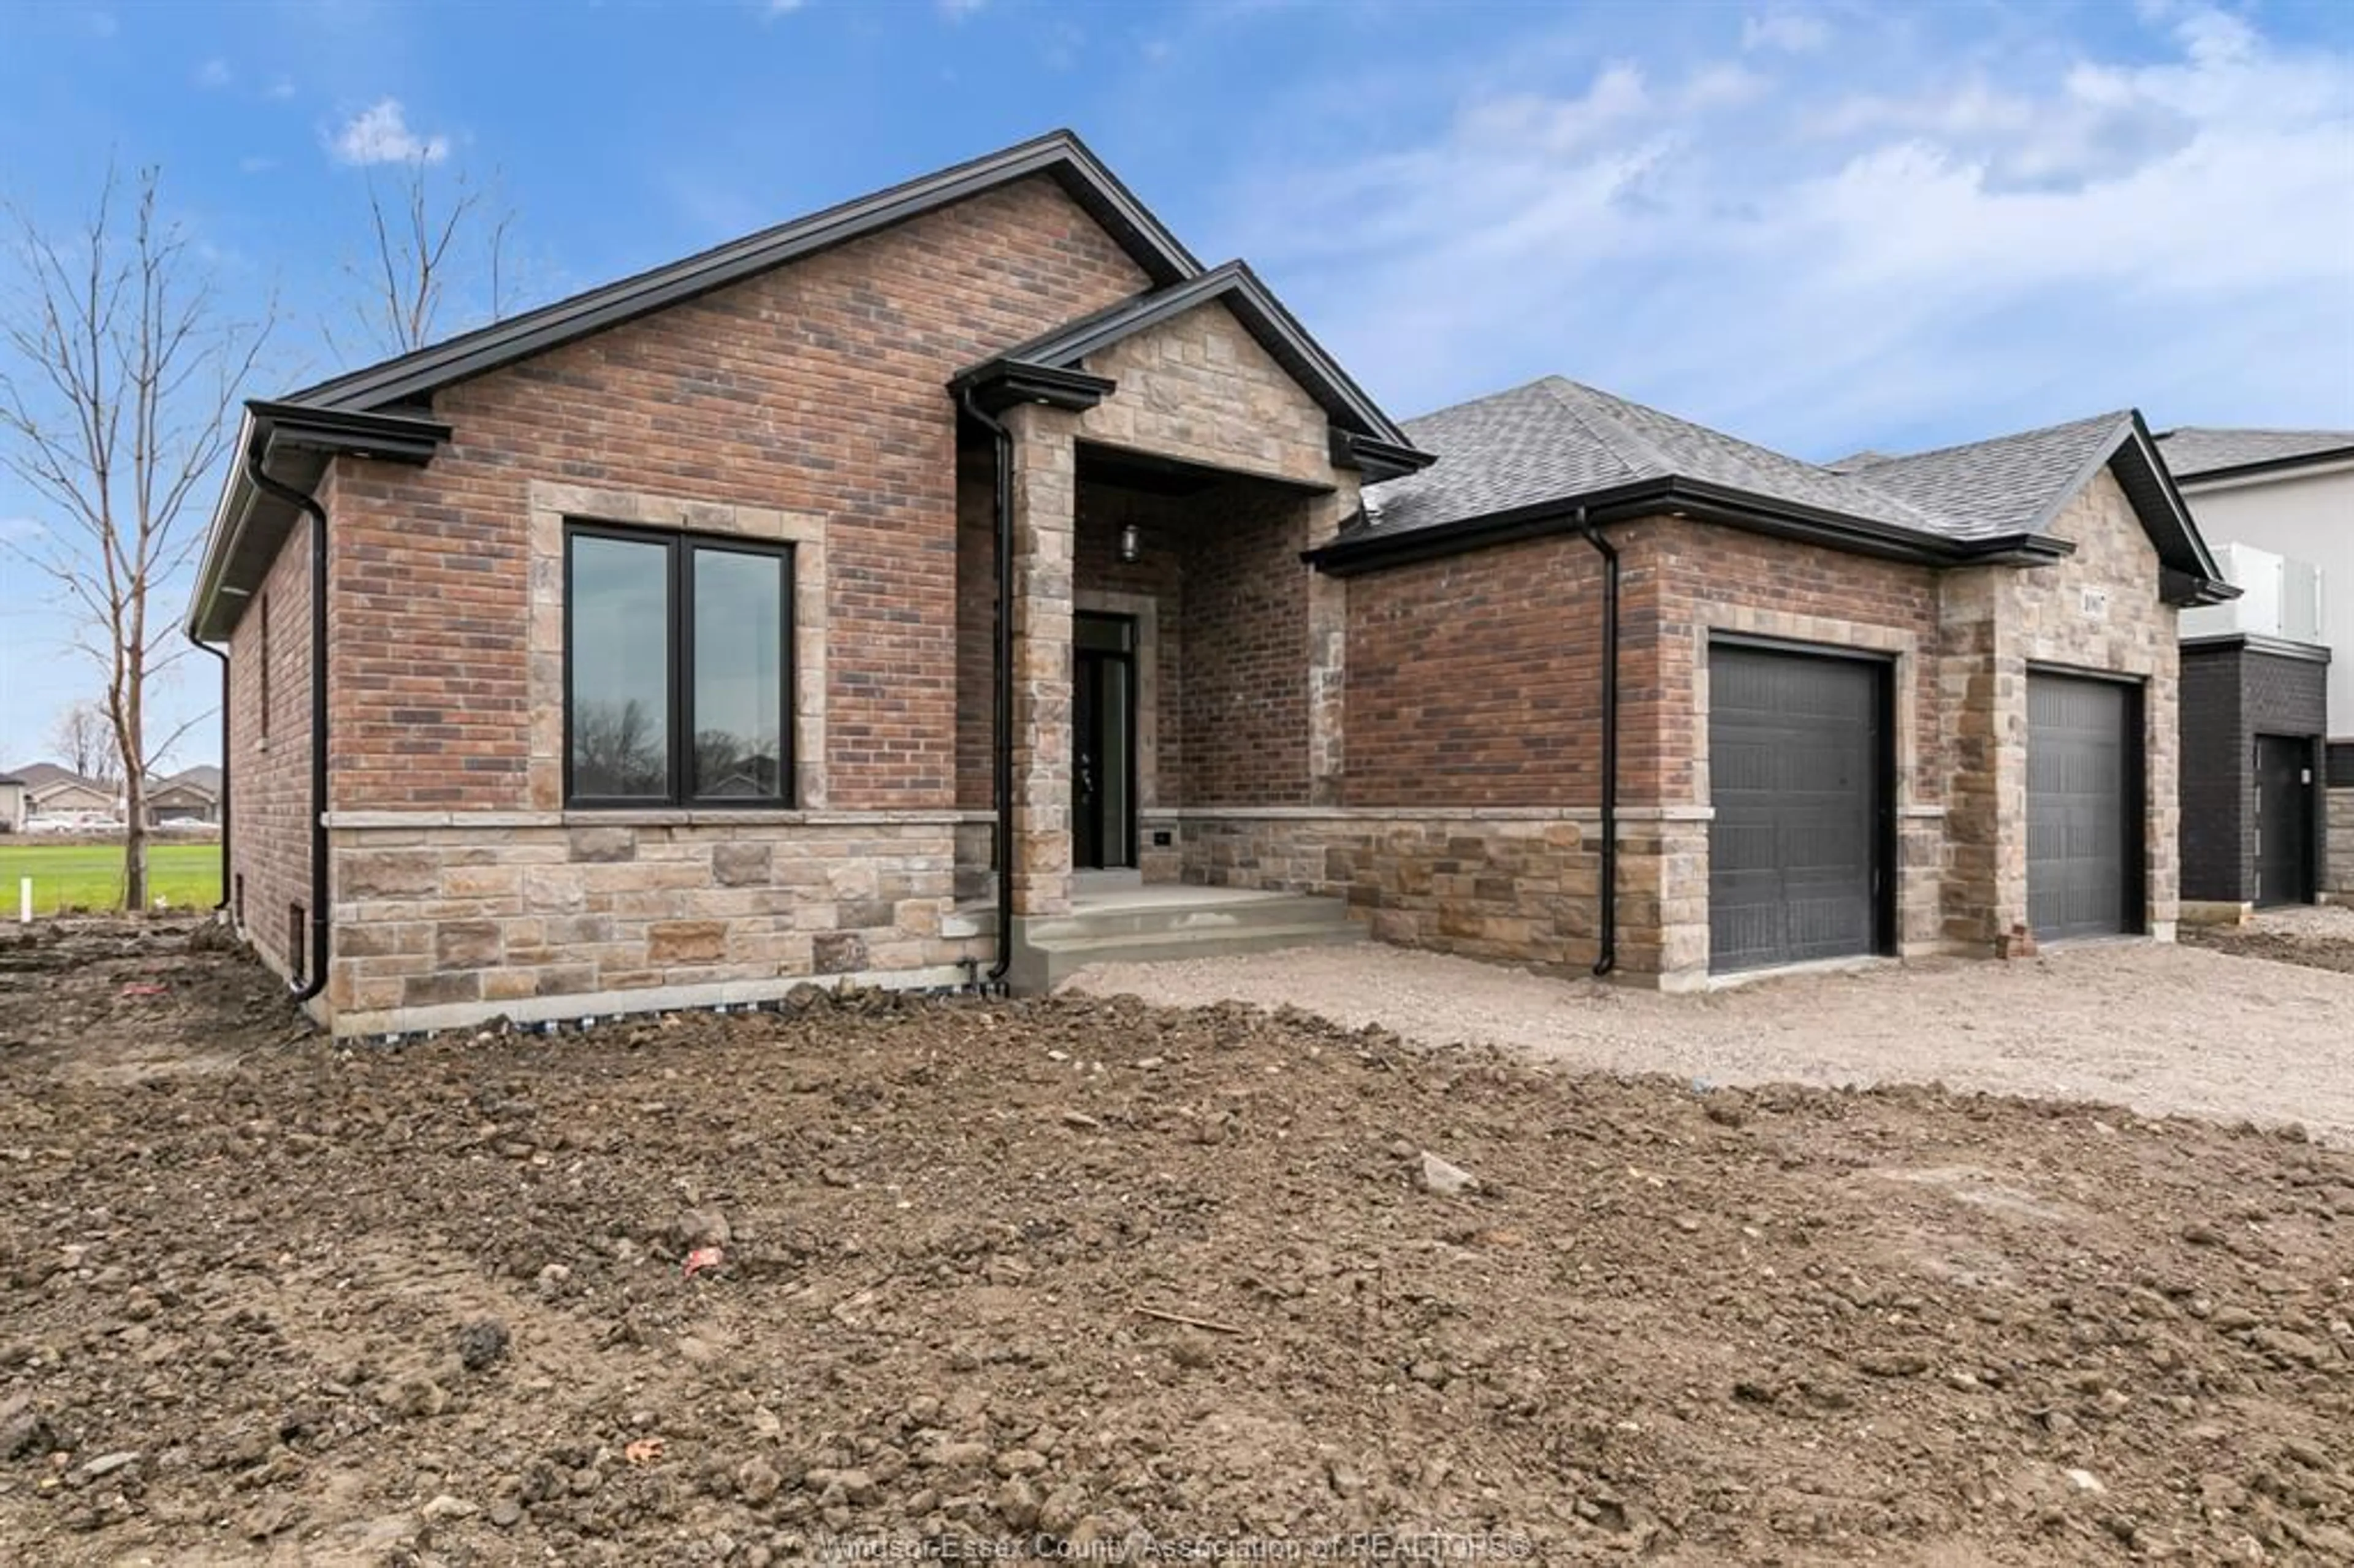 Home with brick exterior material for 256 DOLORES, Essex Ontario N8M 3E9